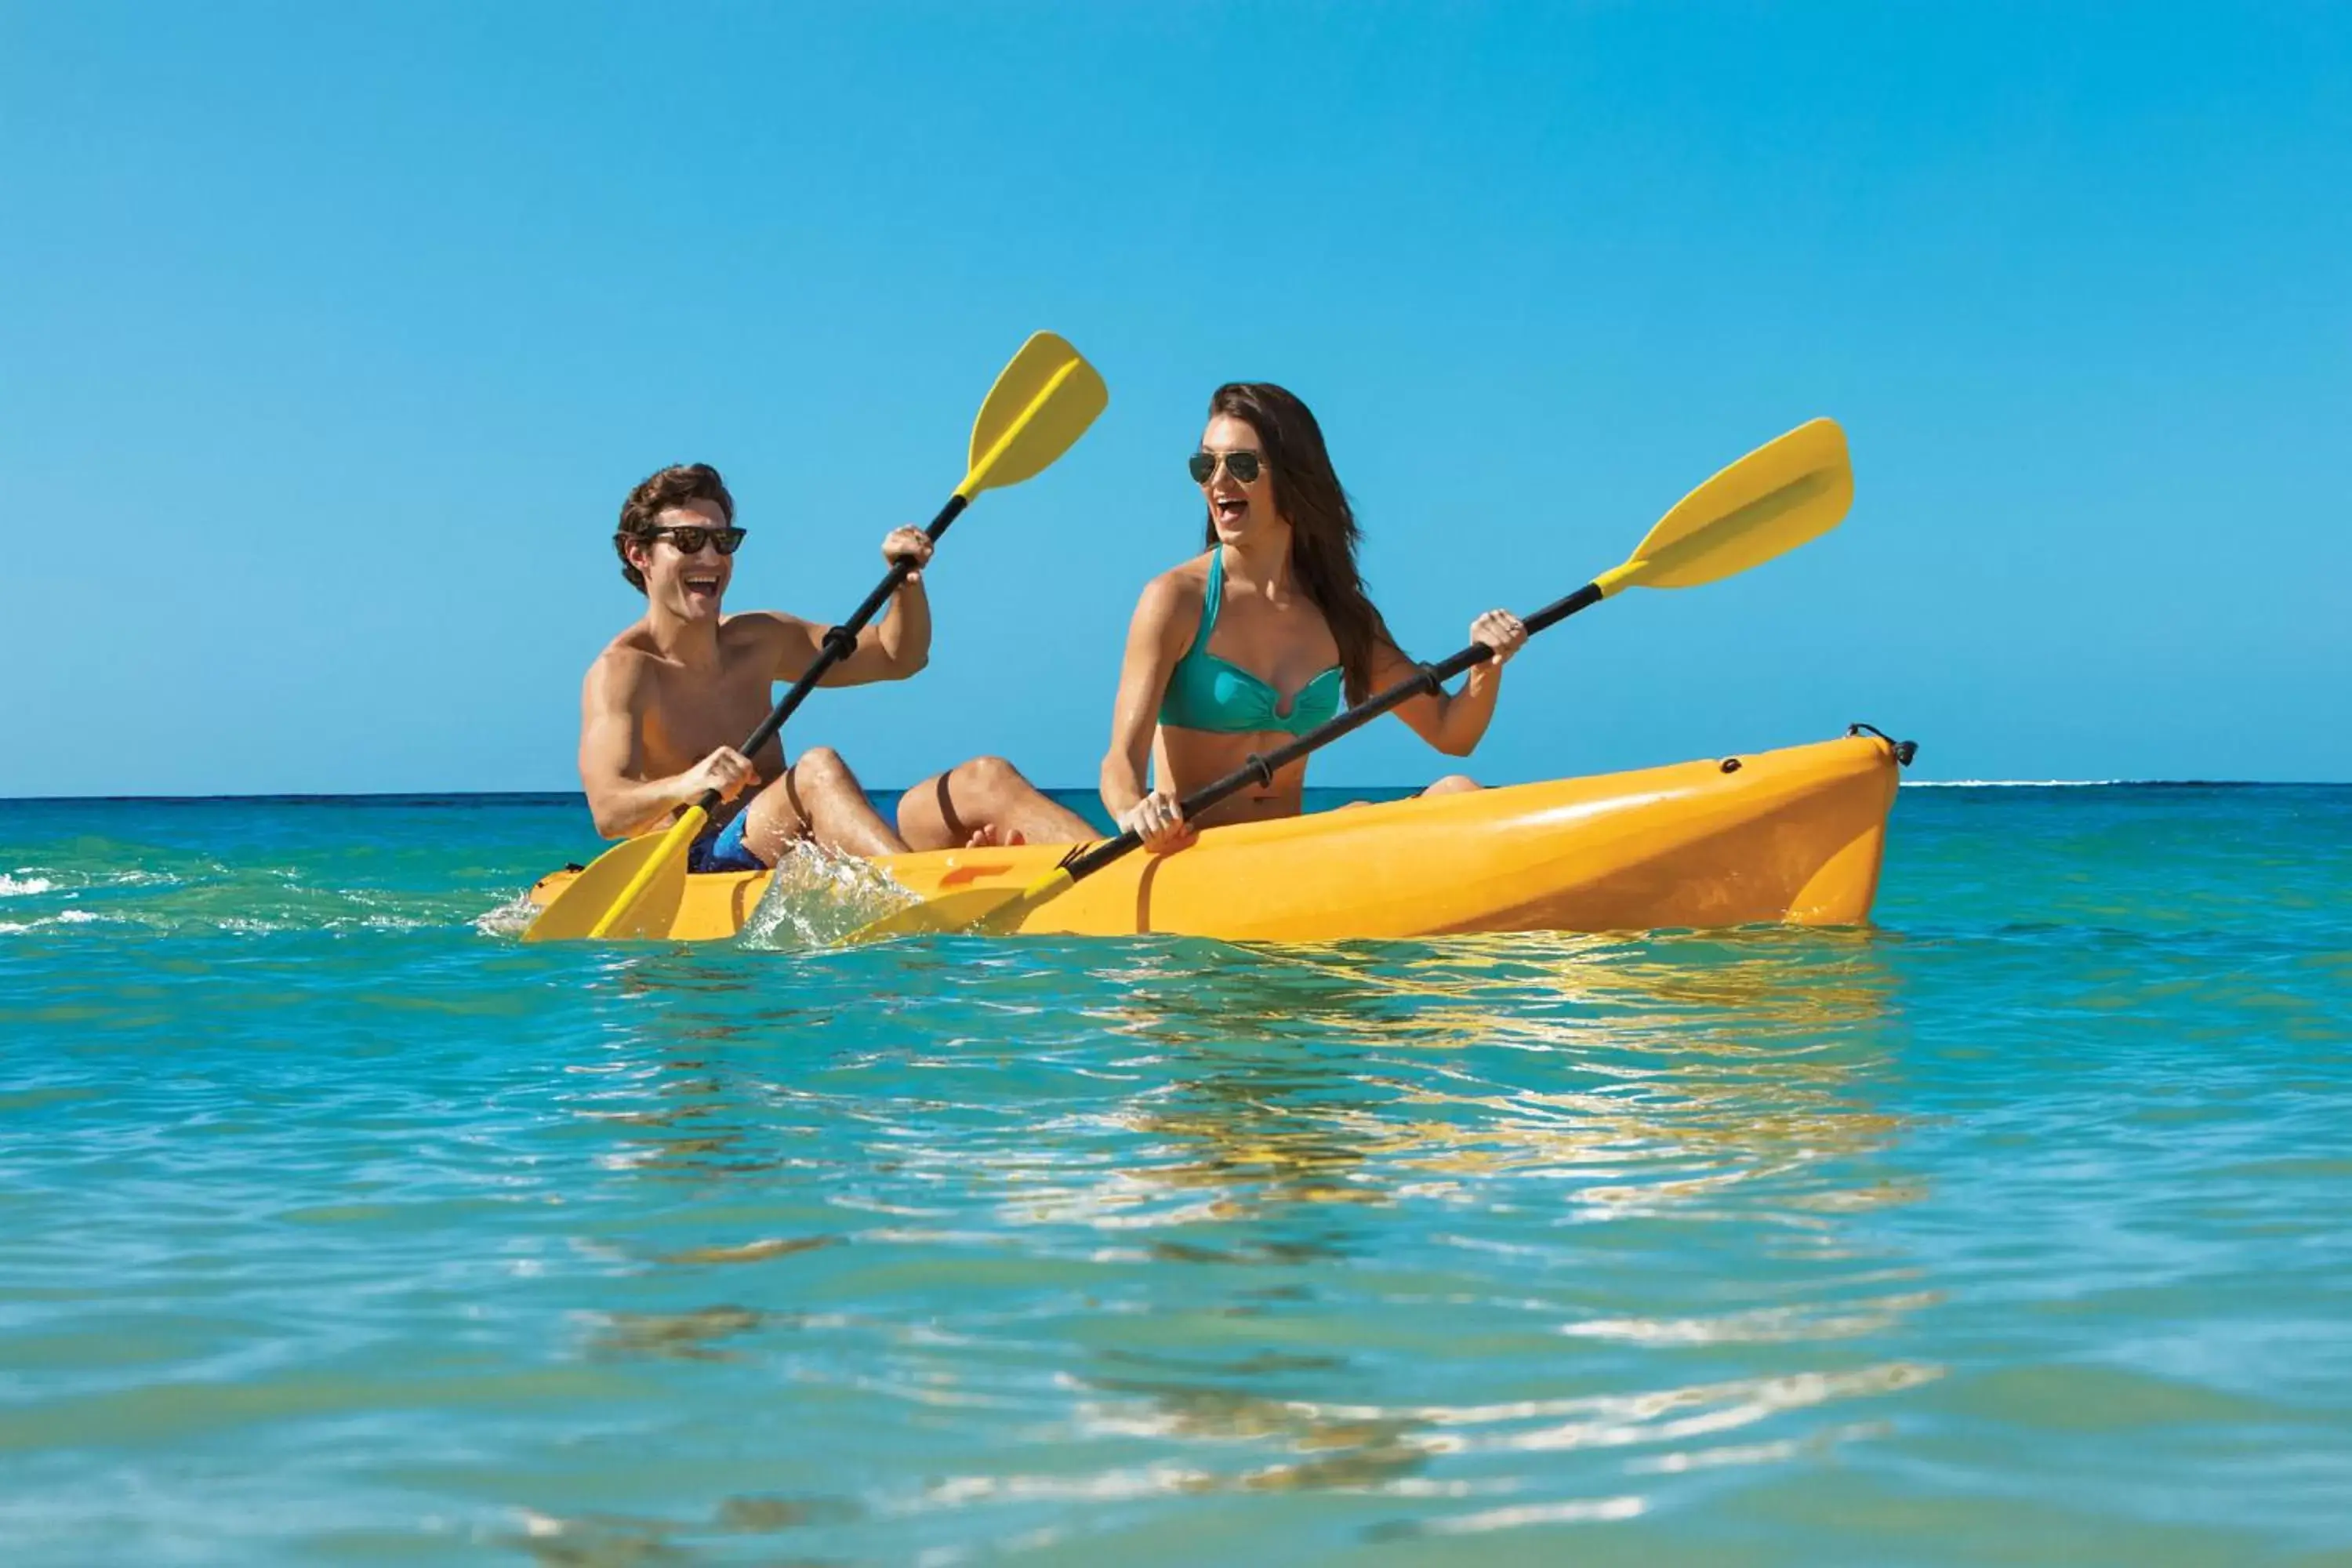 Entertainment, Canoeing in Dreams Cozumel Cape Resort & Spa